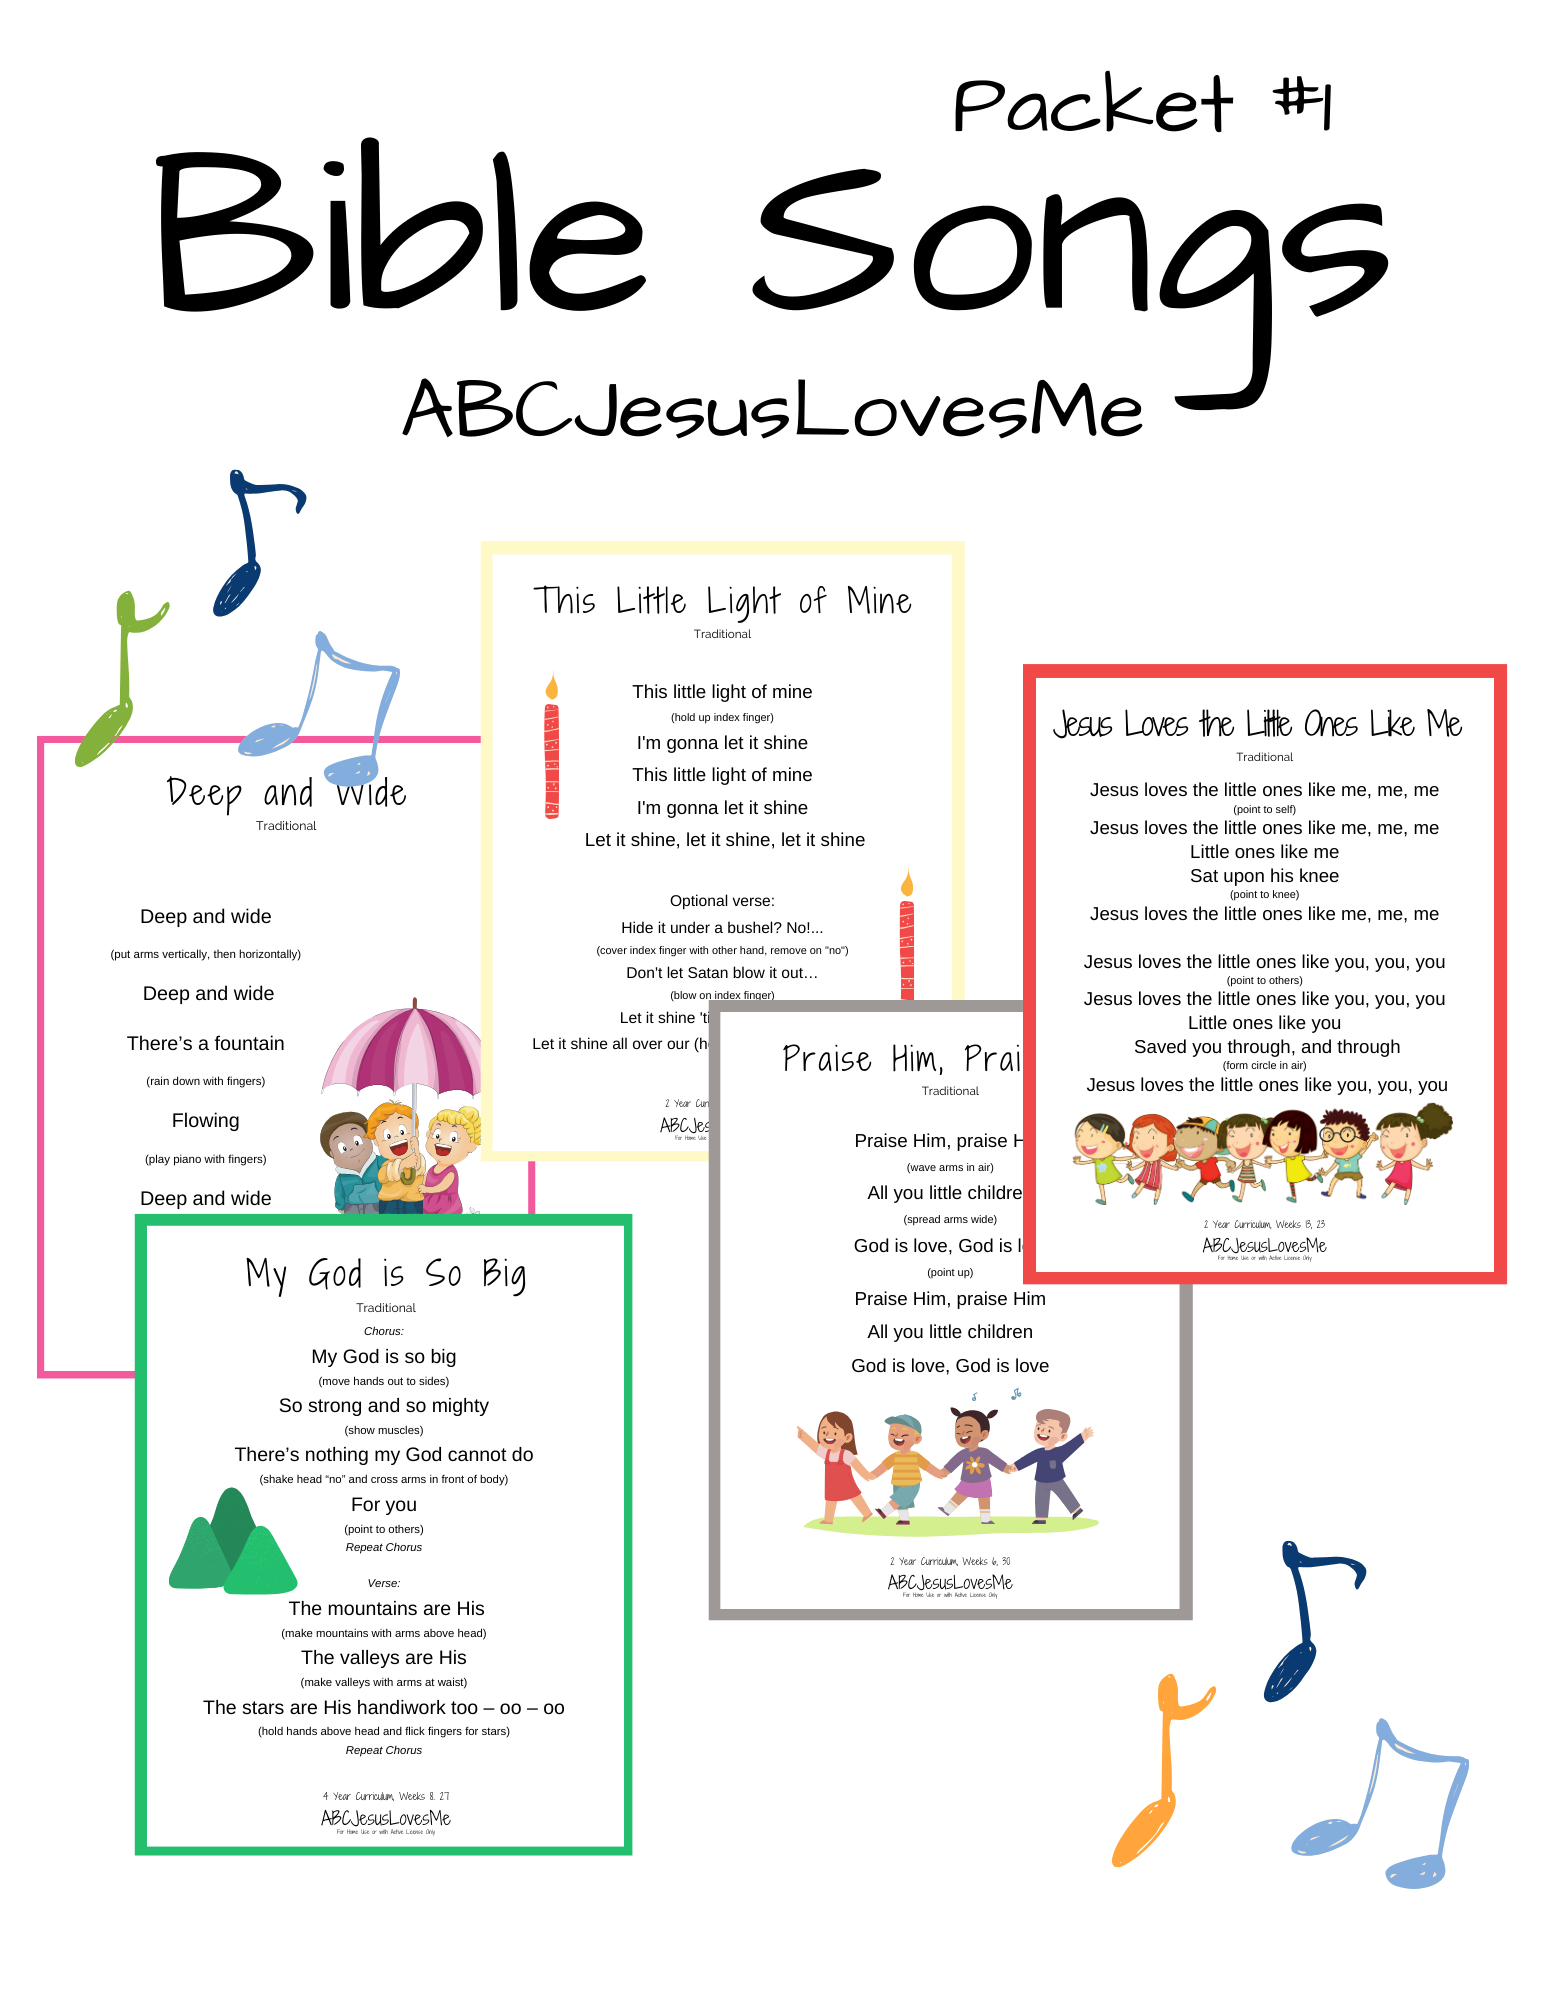 Bible Song Packet #1